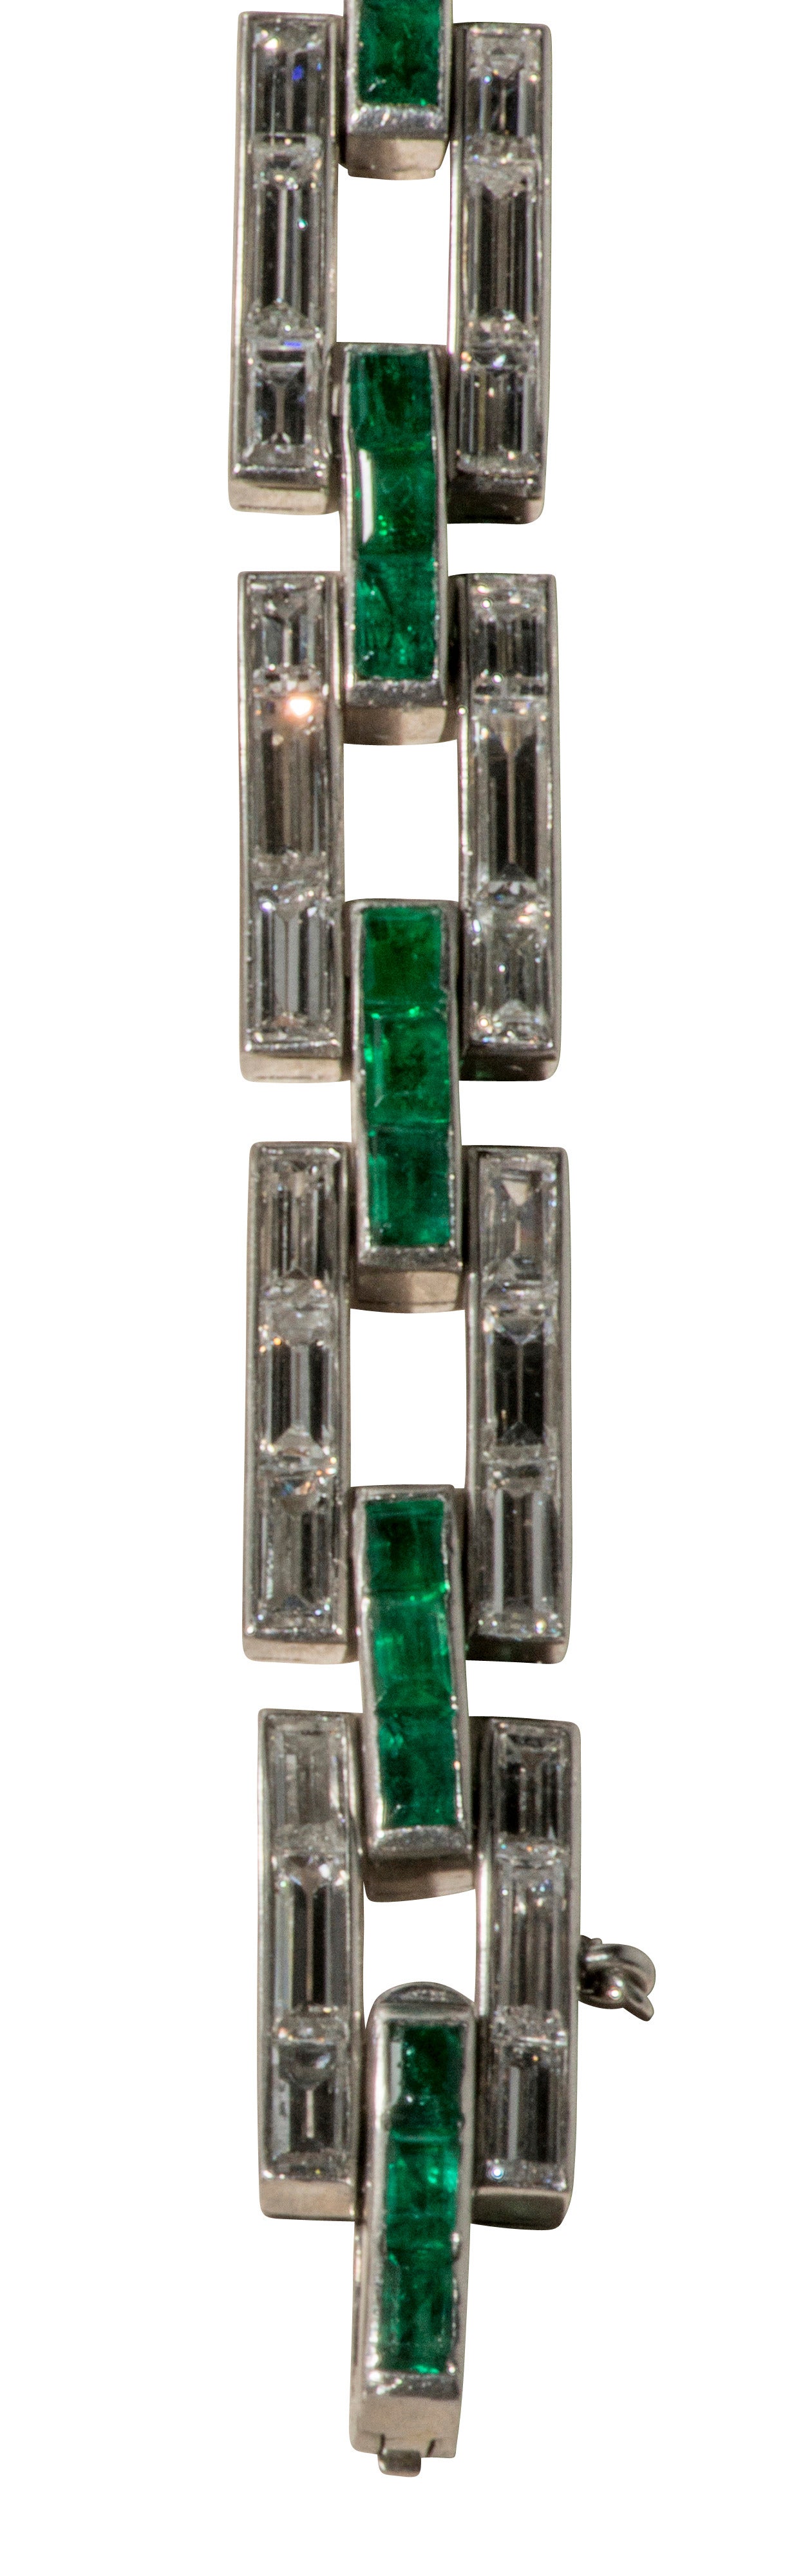 This is an elegant Cartier Art Deco diamond and emerald geometric link bracelet set in platinum from the 1920's. The bracelet is signed on the clasp.